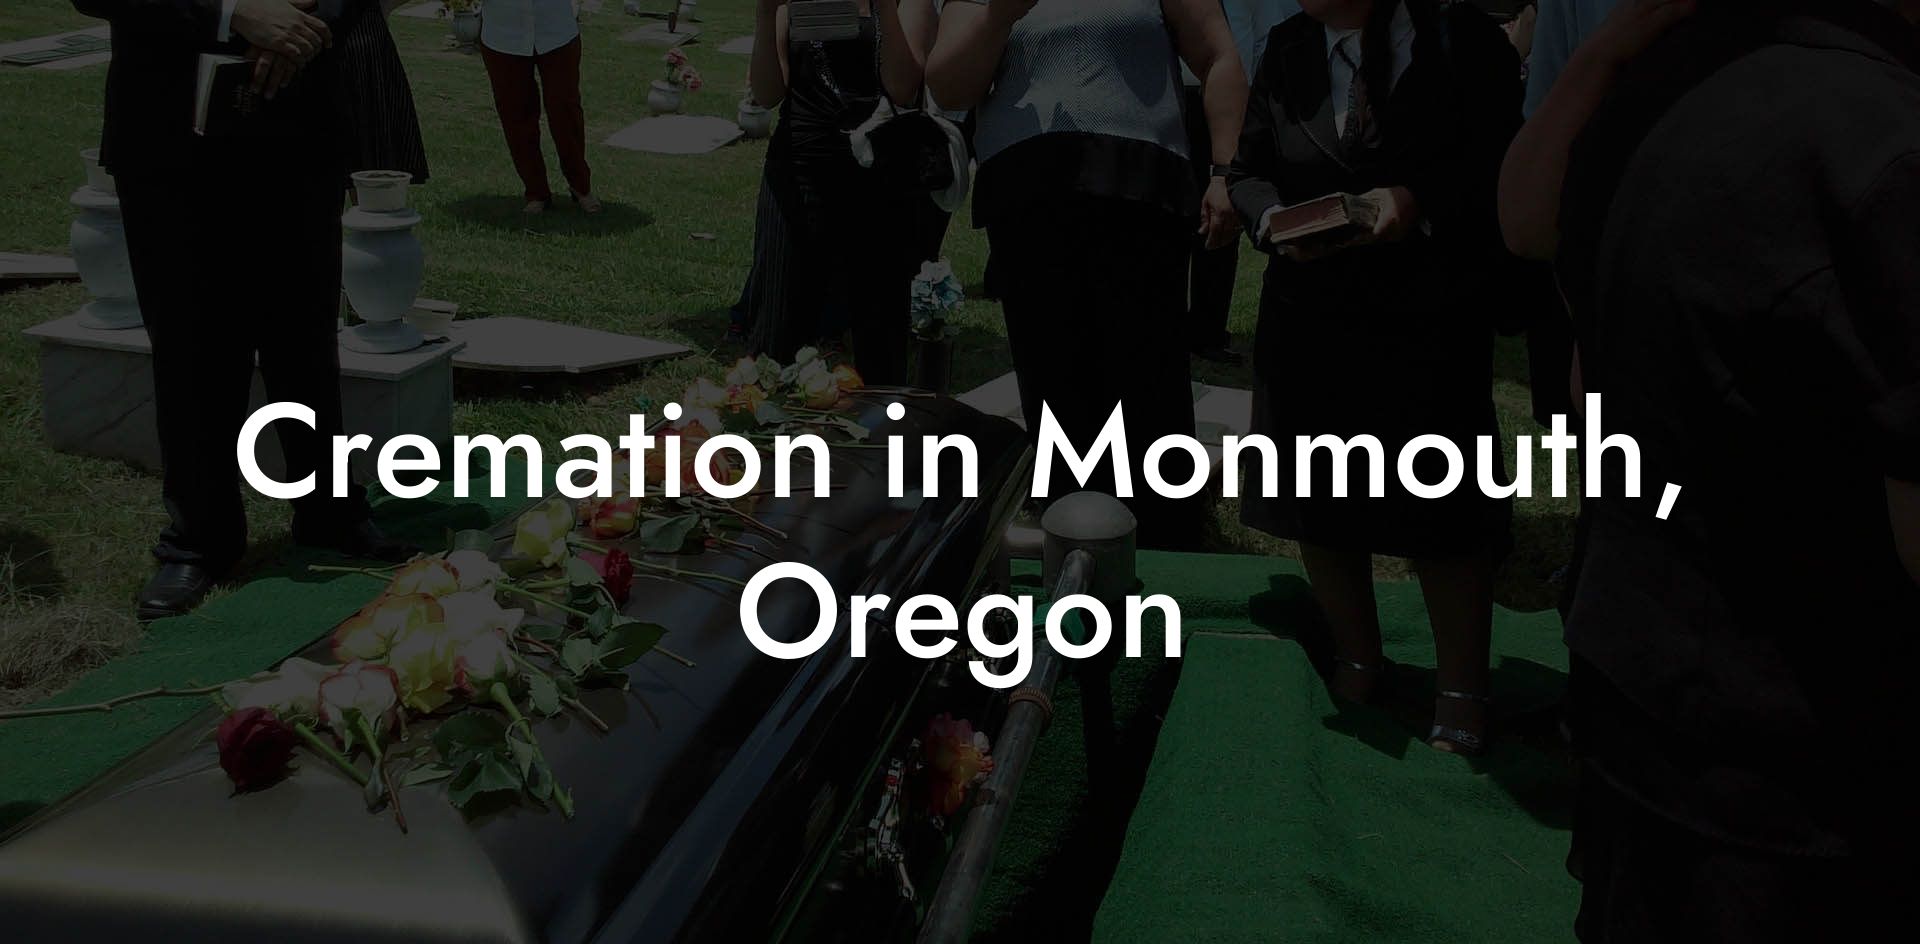 Cremation in Monmouth, Oregon